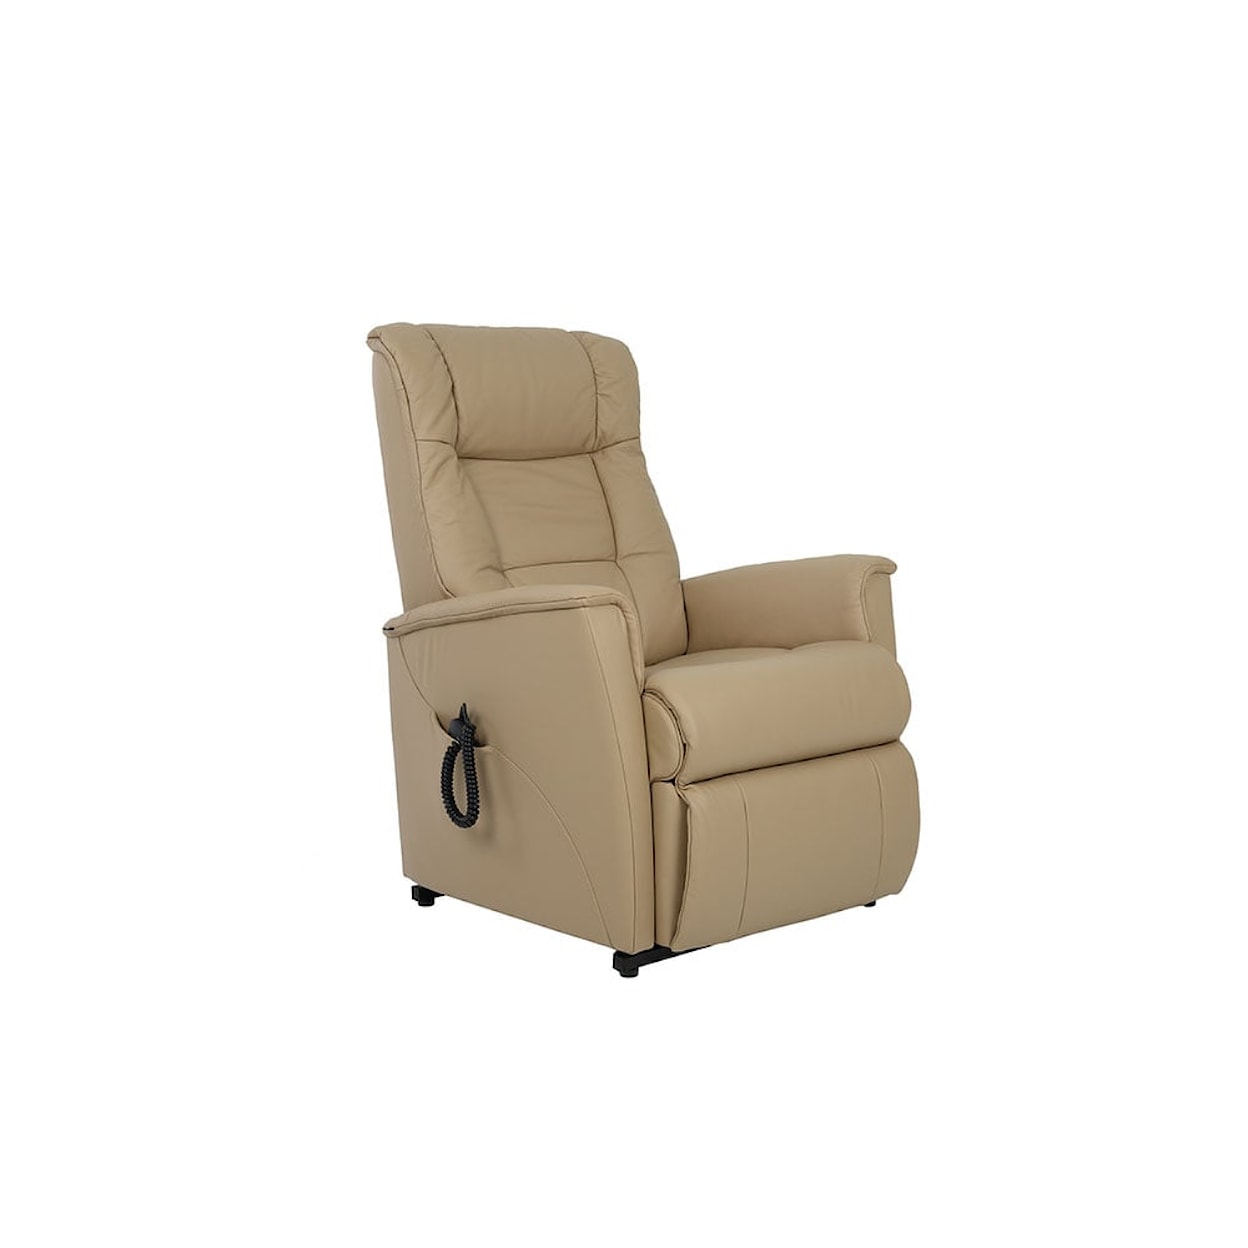 Fjords by Hjellegjerde Relax Collection Memphis Small Lift Chair